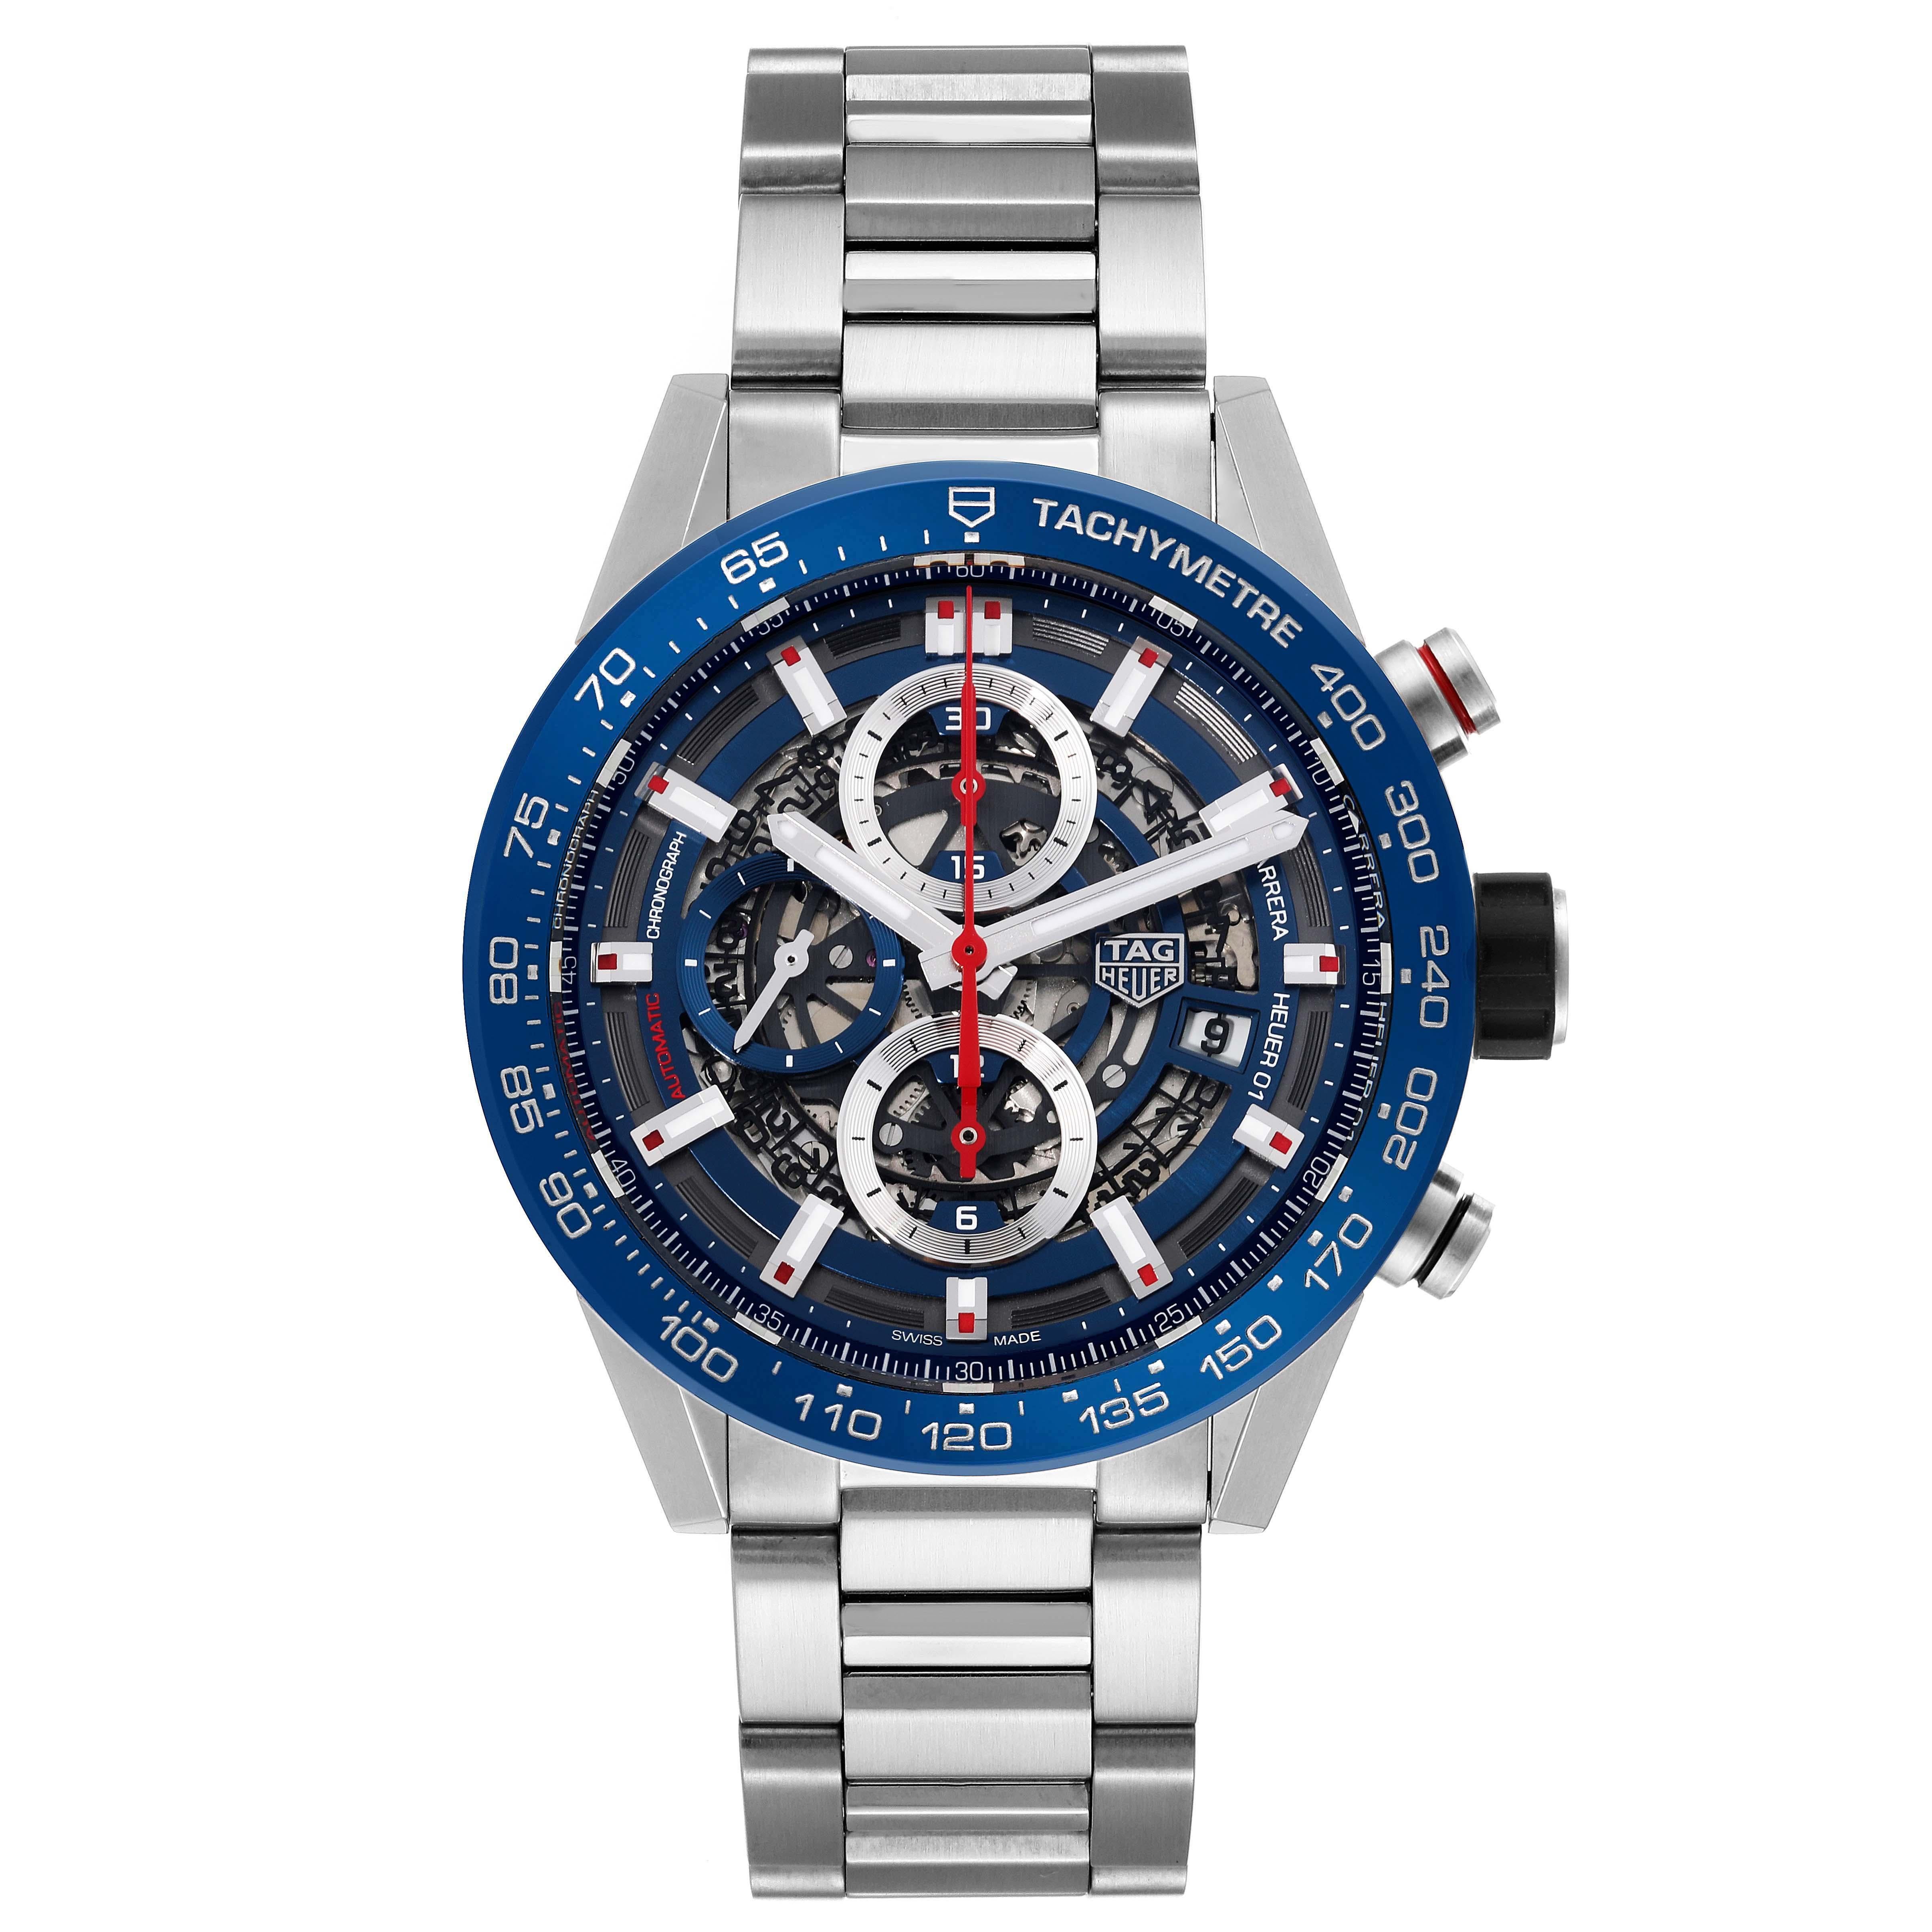 Tag Heuer Carrera Blue Skeleton Dial Chronograph Steel Mens Watch CAR201T. Automatic self-winding chronograph movement. Stainless steel case 43.0 mm in diameter. Exhibition transparent sapphire crystal caseback. Blue bezel with tachymeter scale.